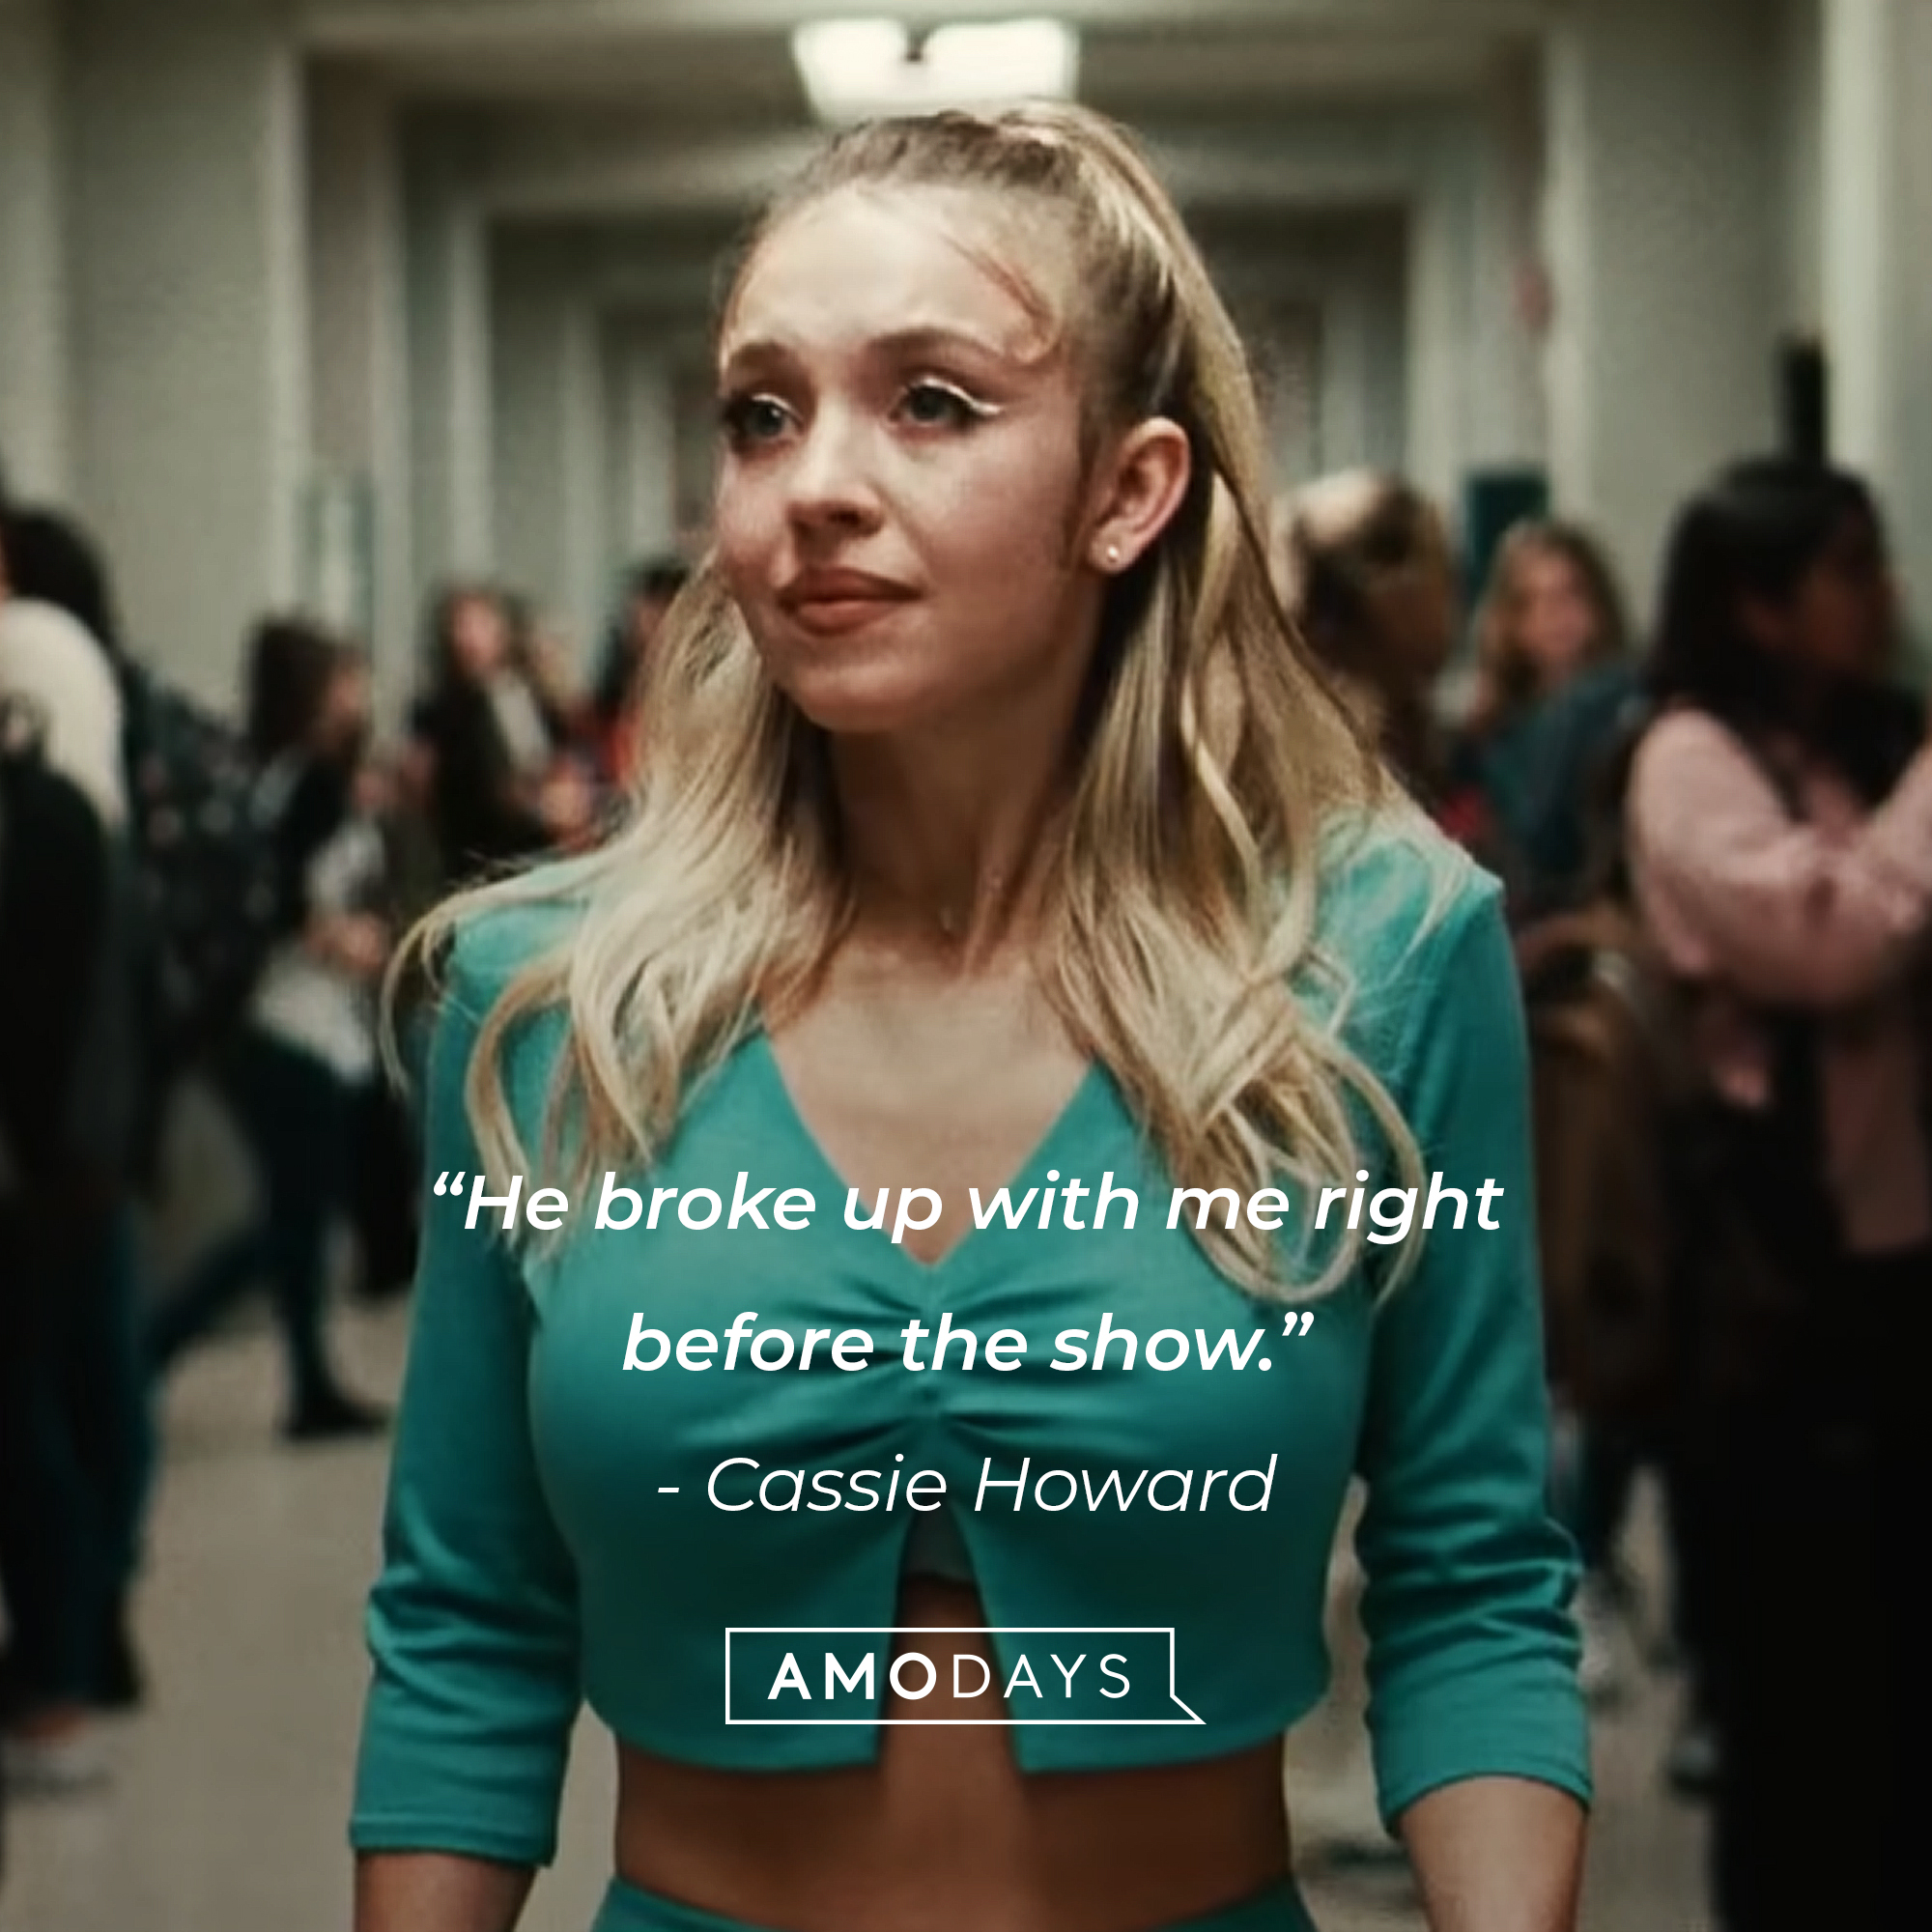 An image of Cassie Howard,  with her quote: “He broke up with me right before the show.” | Source: HBO